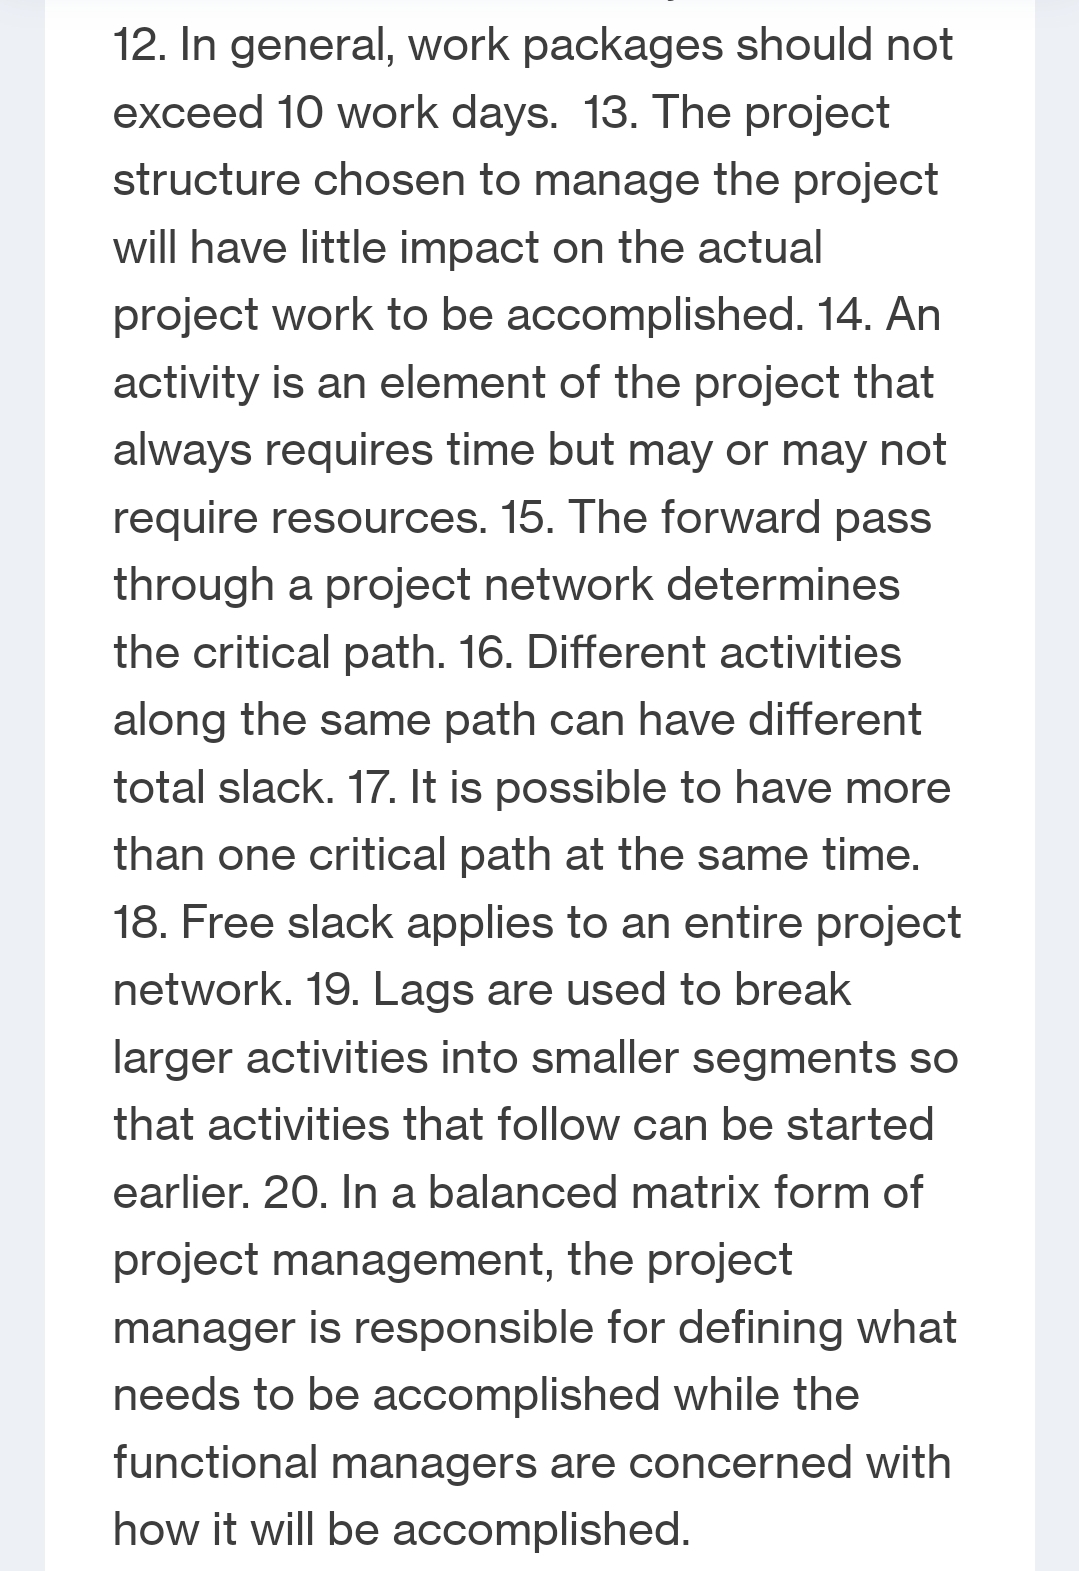 12. In general, work packages should not
exceed 10 work days. 13. The project
structure chosen to manage the project
will have little impact on the actual
project work to be accomplished. 14. An
activity is an element of the project that
always requires time but may or may not
require resources. 15. The forward pass
through a project network determines
the critical path. 16. Different activities
along the same path can have different
total slack. 17. It is possible to have more
than one critical path at the same time.
18. Free slack applies to an entire project
network. 19. Lags are used to break
larger activities into smaller segments so
that activities that follow can be started
earlier. 20. In a balanced matrix form of
project management, the project
manager is responsible for defining what
needs to be accomplished while the
functional managers are concerned with
how it will be accomplished.